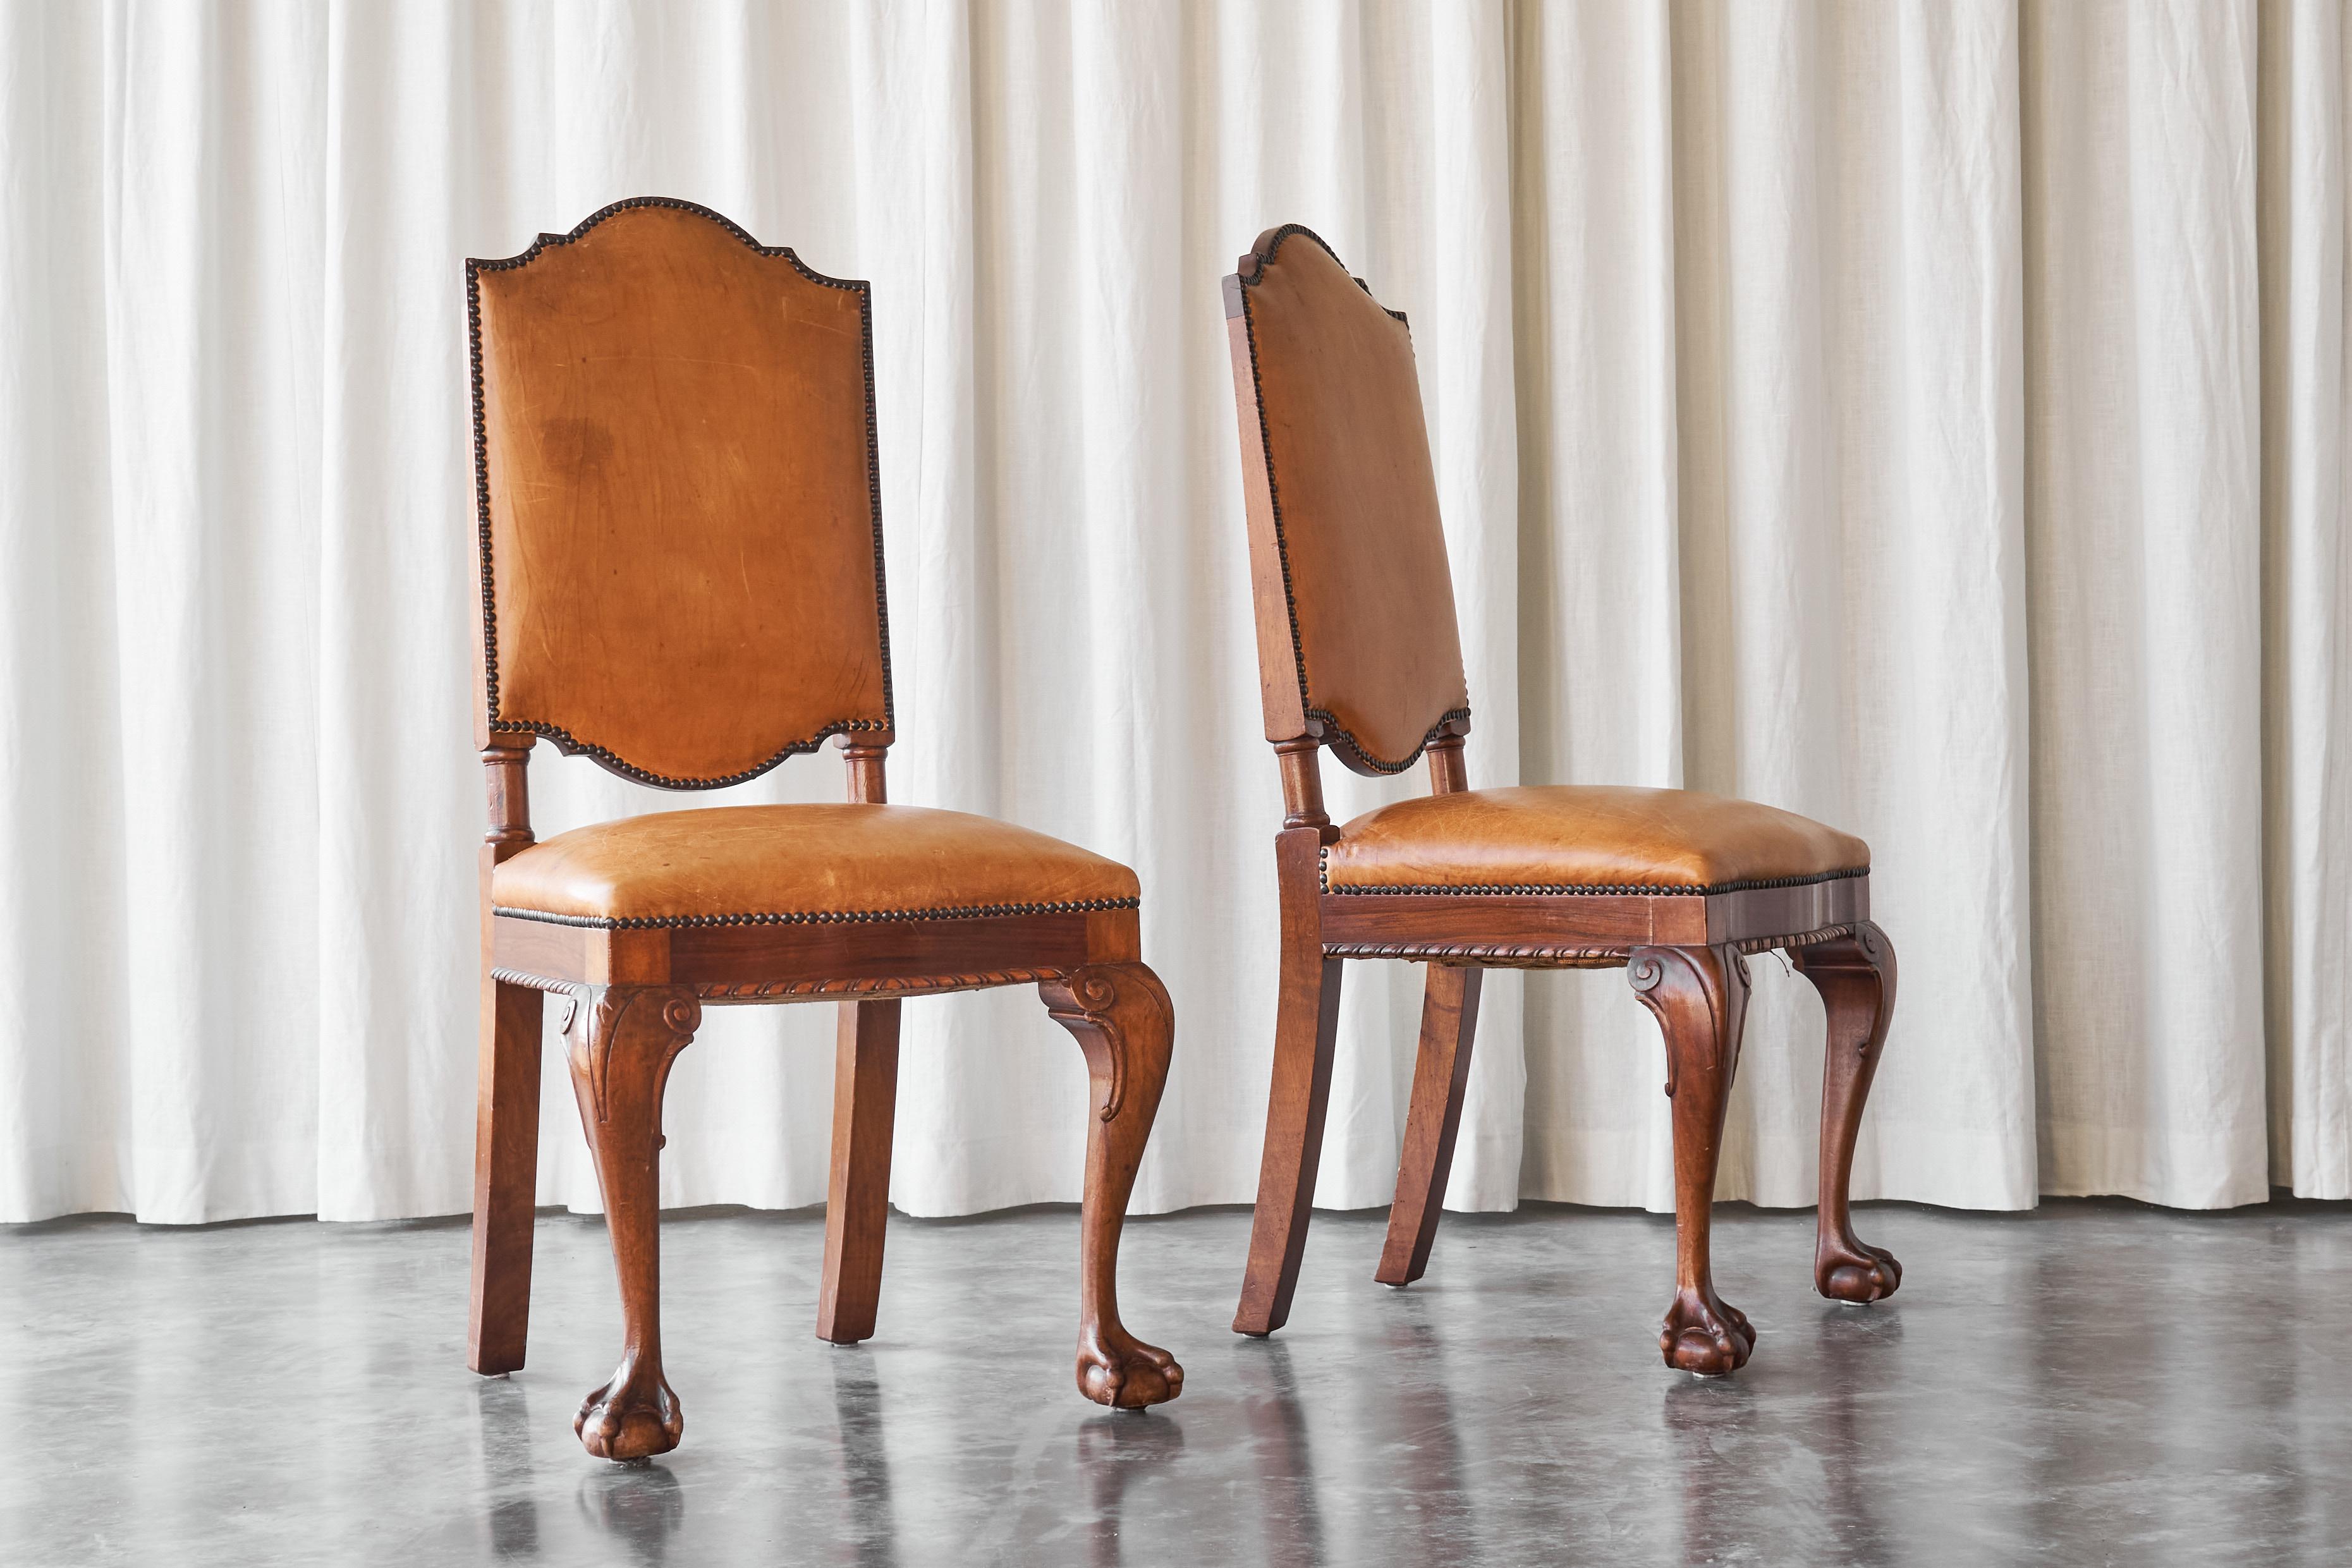 't Woonhuys Amsterdam Rare Pair of Side Chairs in Patinated Cognac Leather 1920s For Sale 3